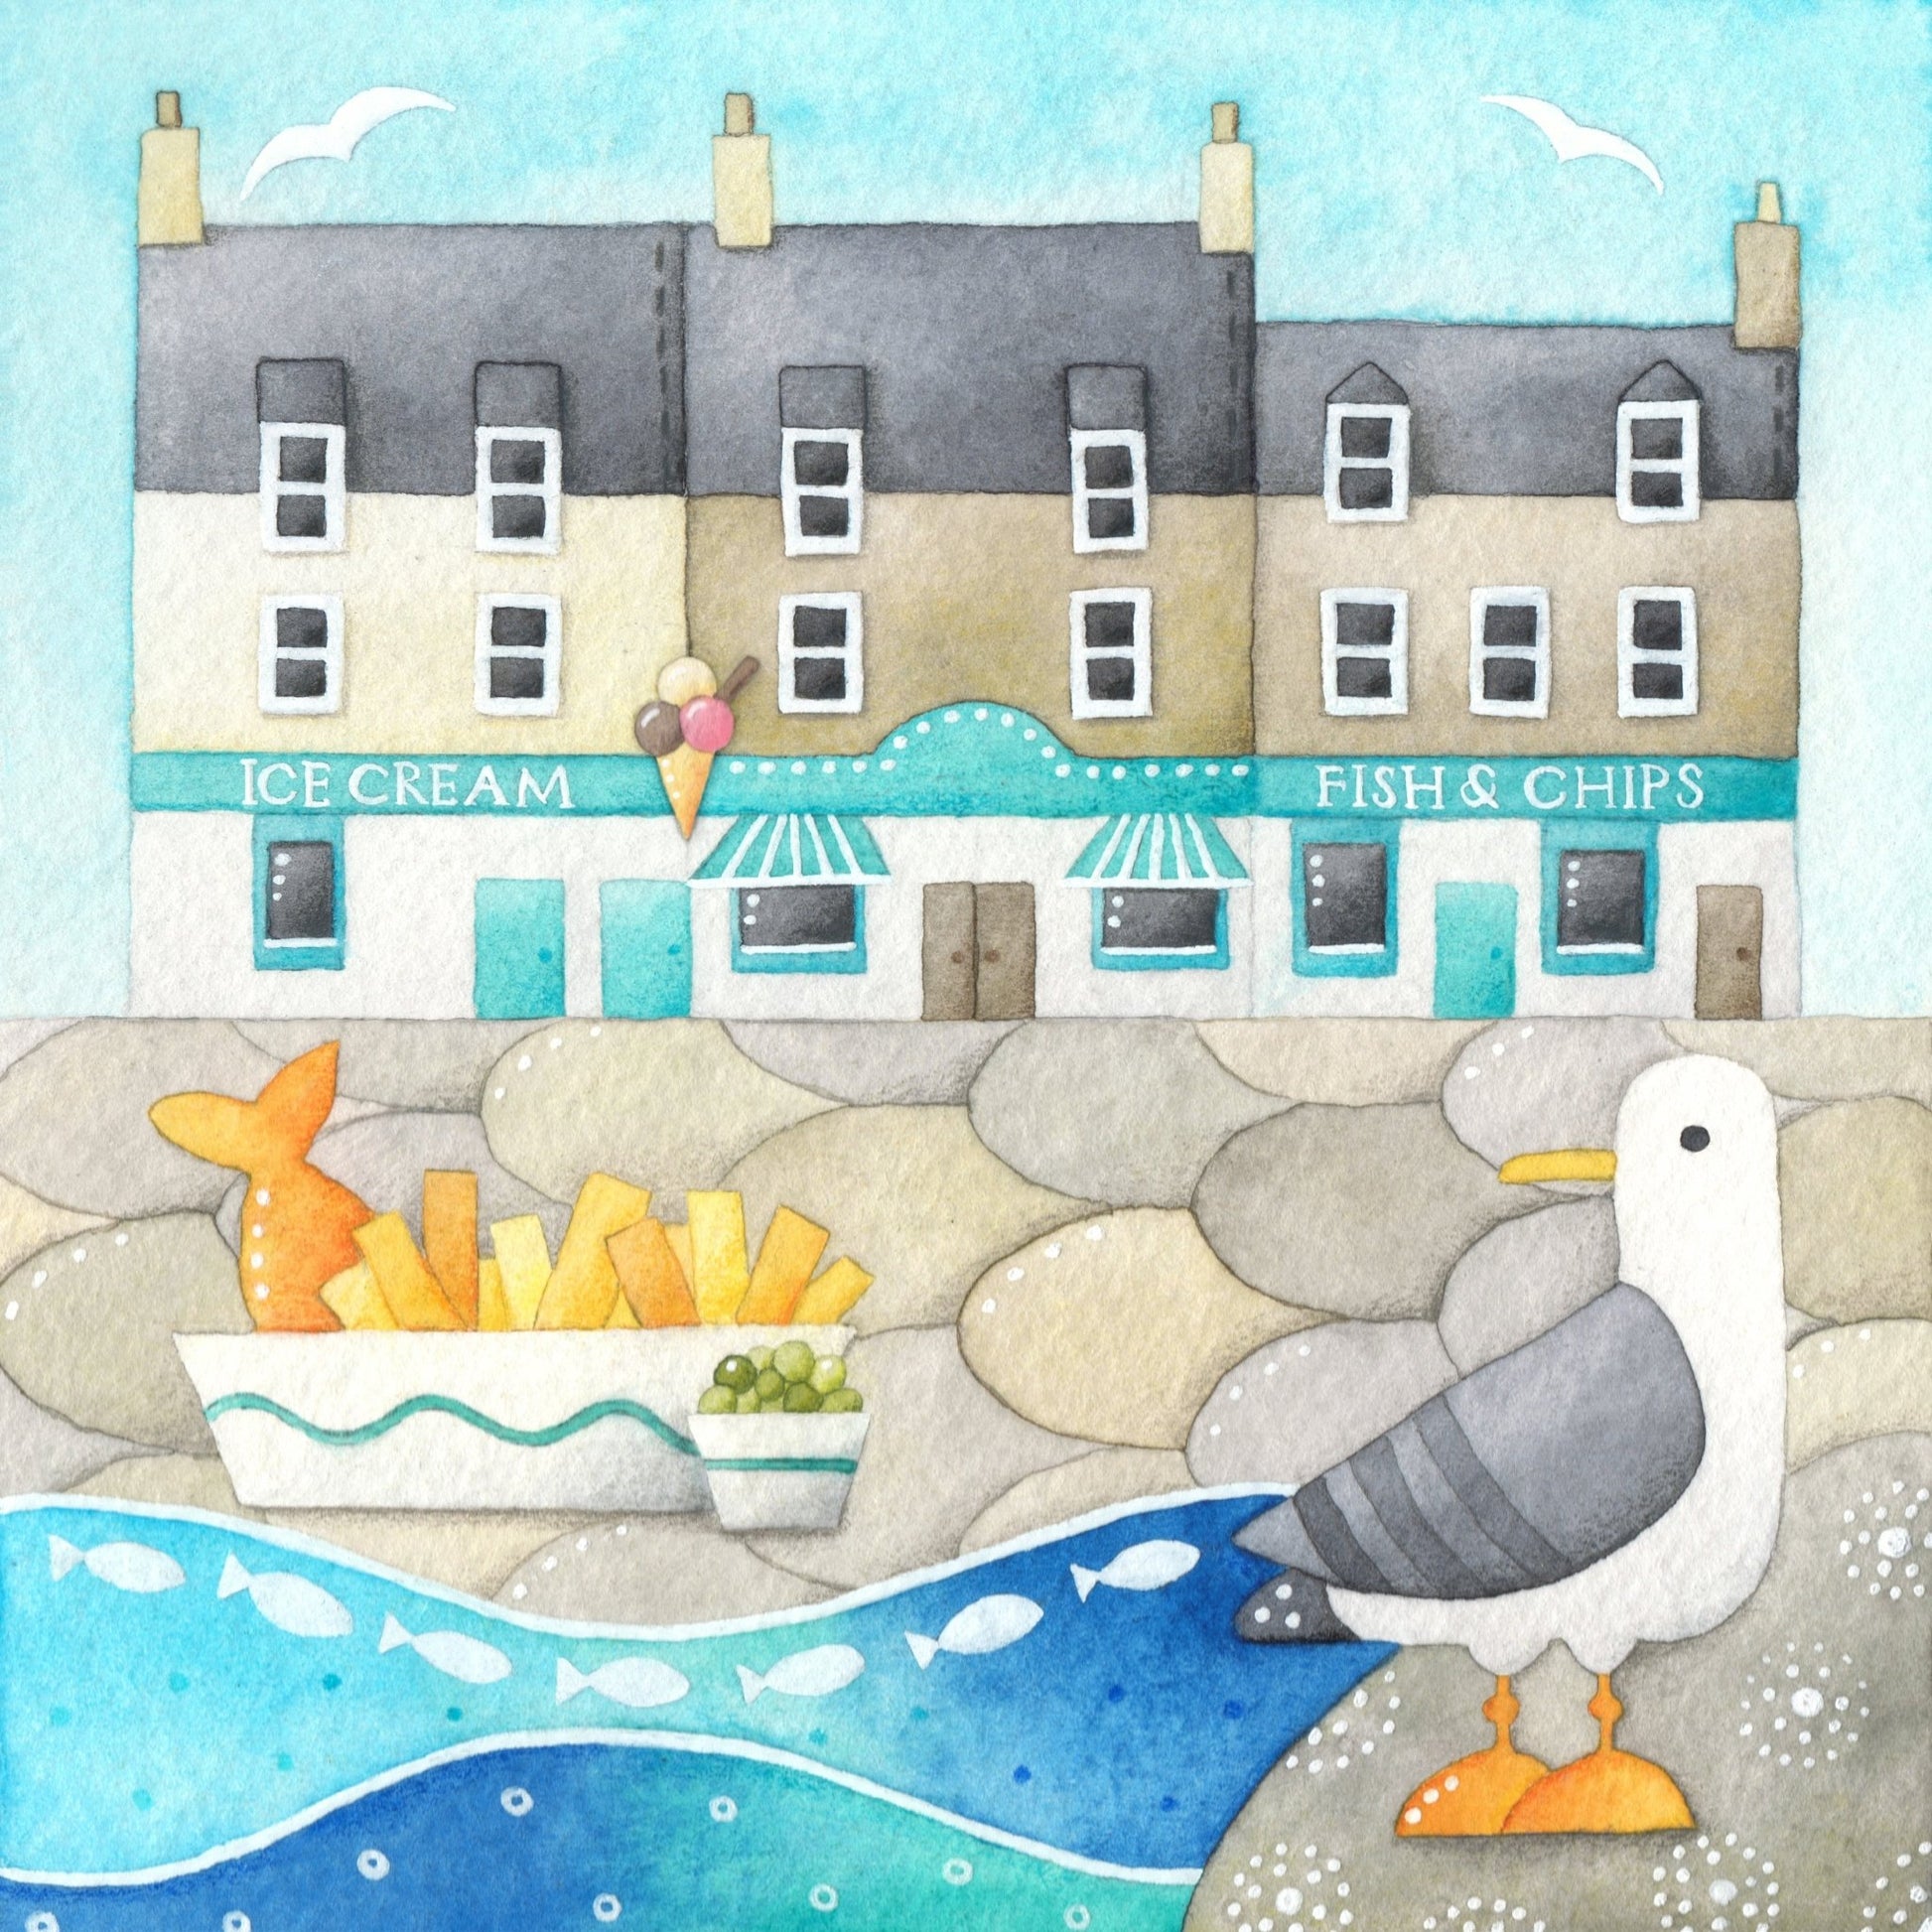 Mug - Fish and Chips at Anstruther - Seaside Watercolours, East Neuk of Fife - East Neuk Beach Crafts